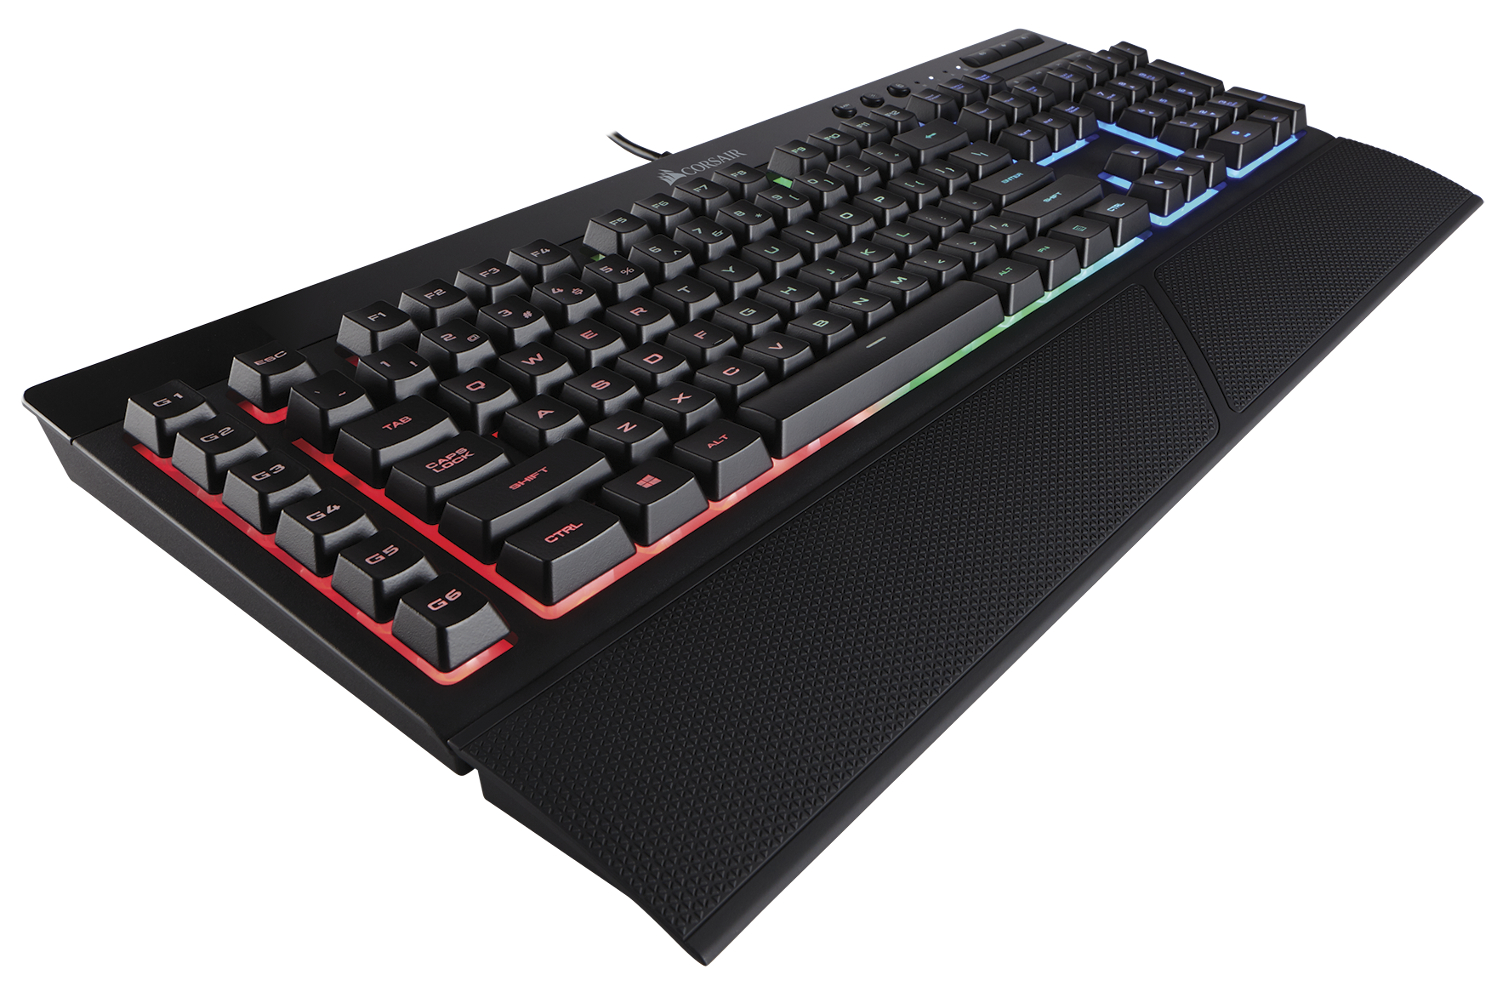 Corsair Targets FPS Gamers With the Harpoon RGB | Trends